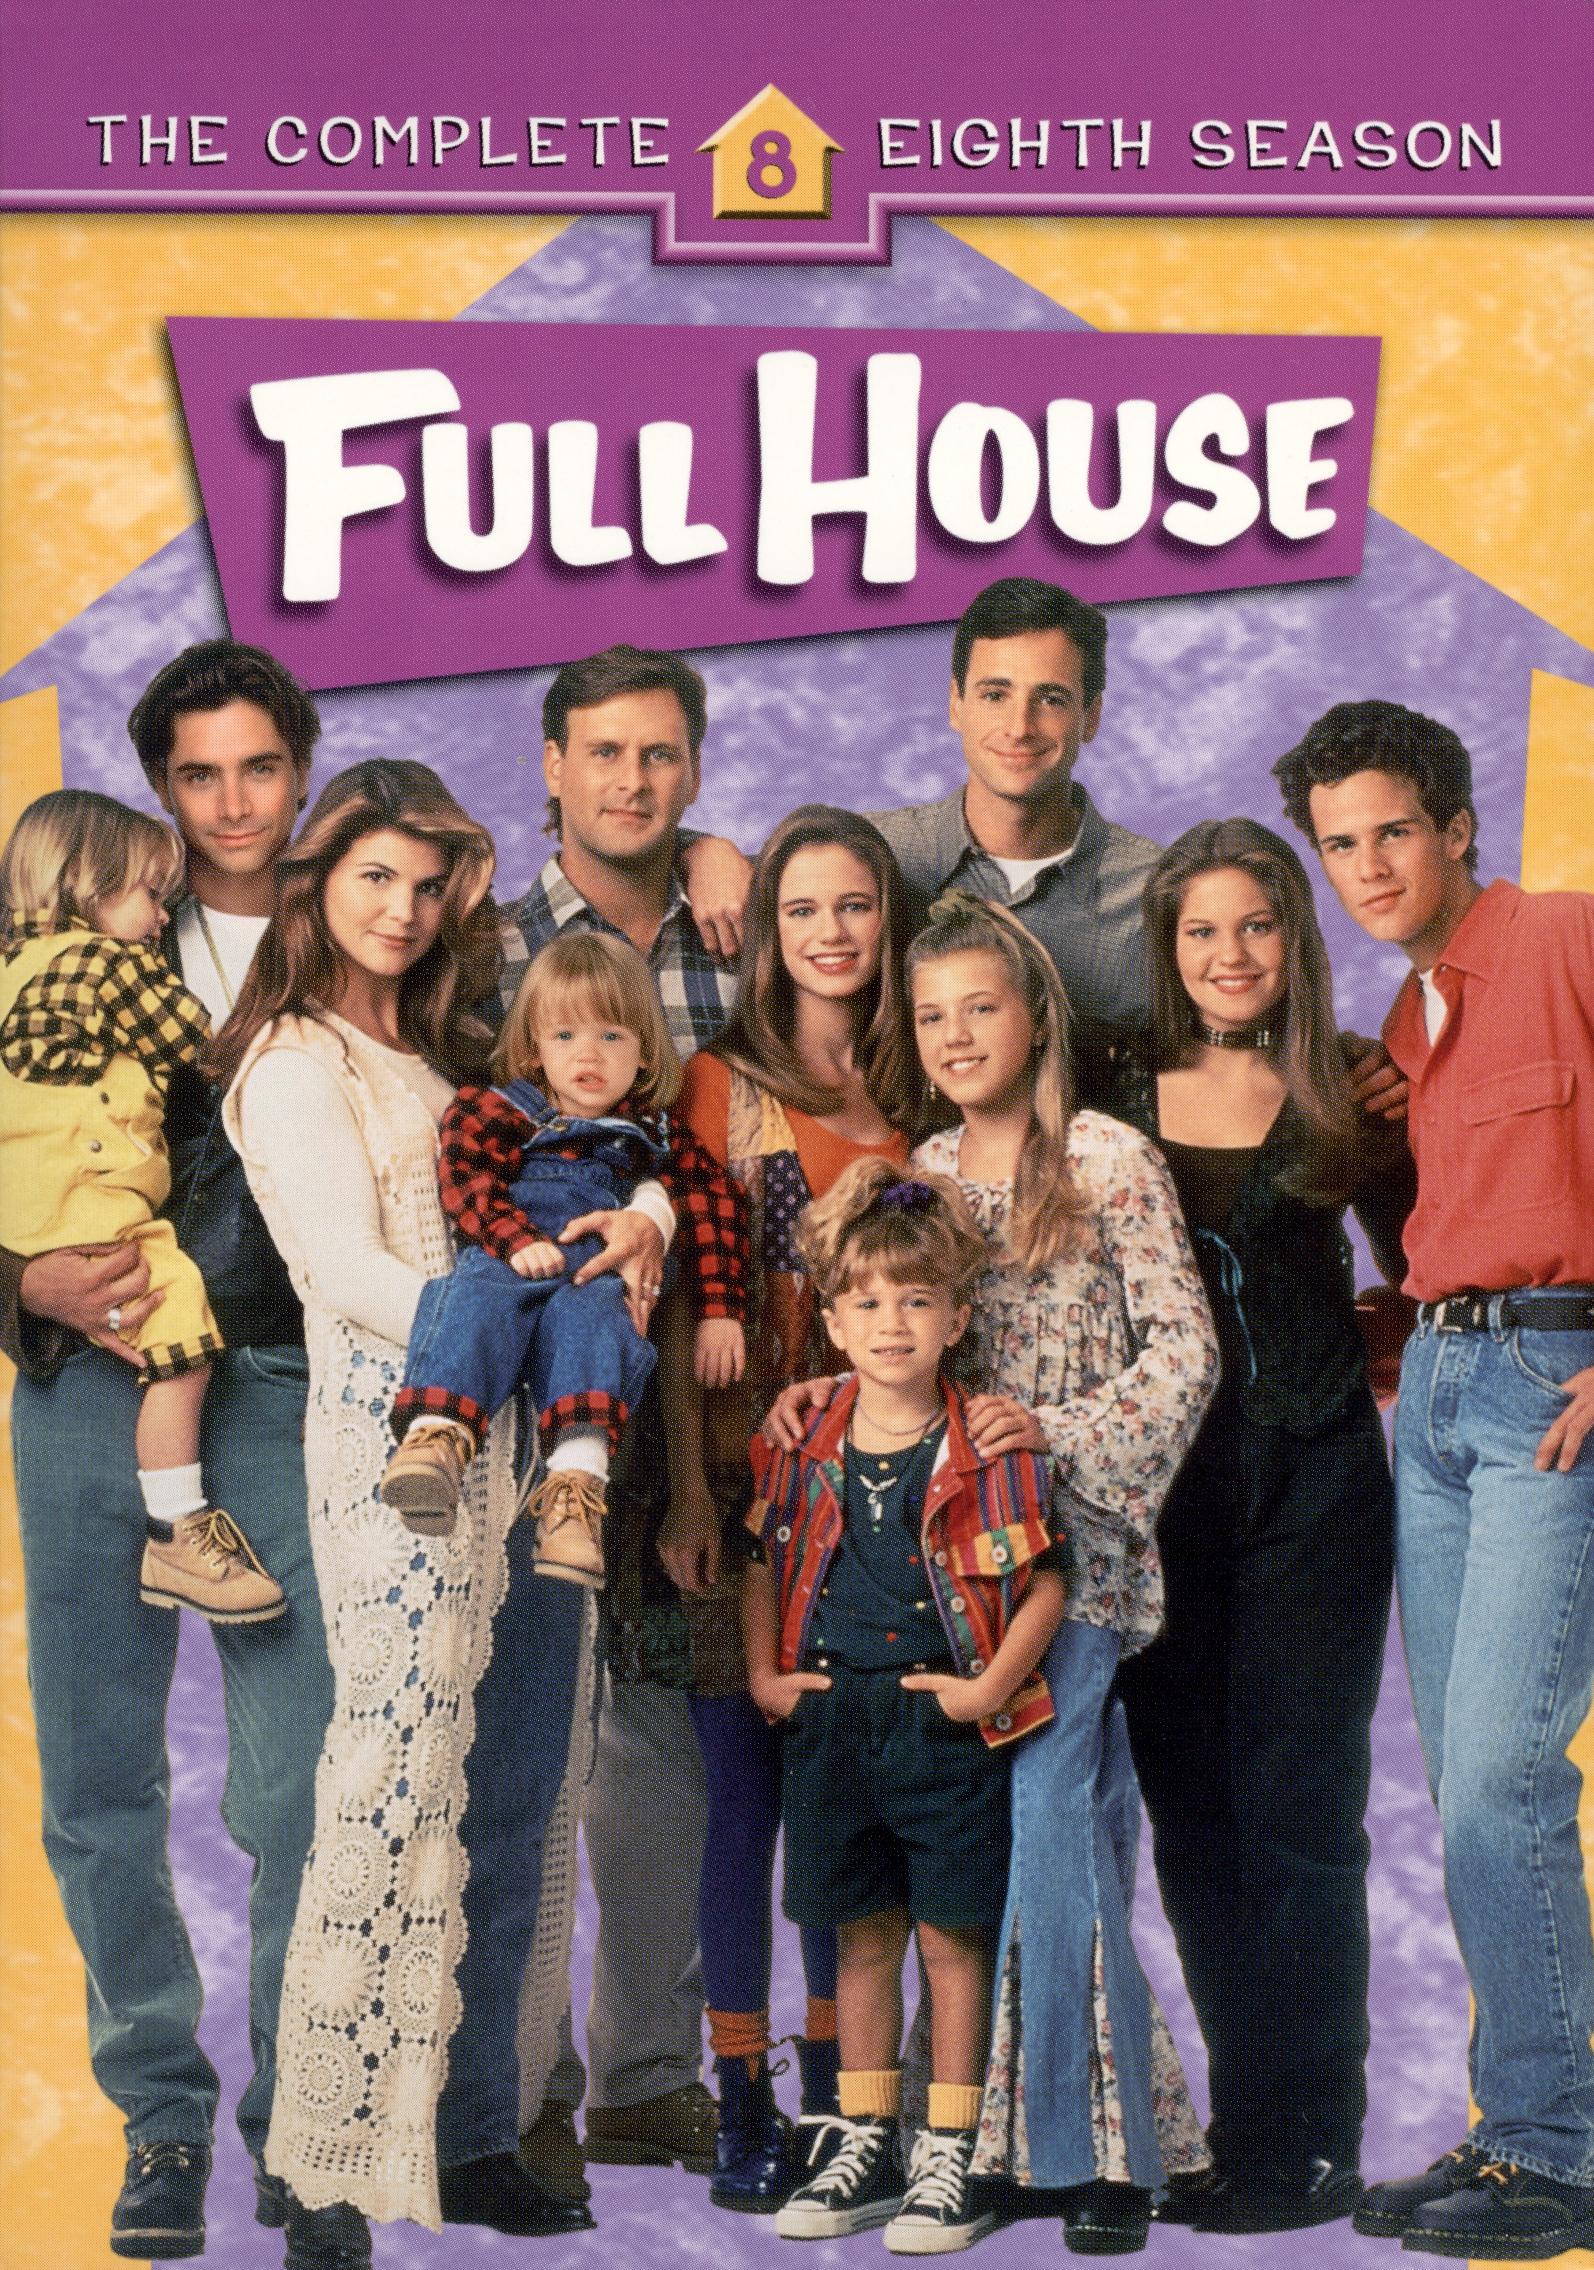 Full House The Complete Eighth Season [4 Discs] [DVD]   Best Buy